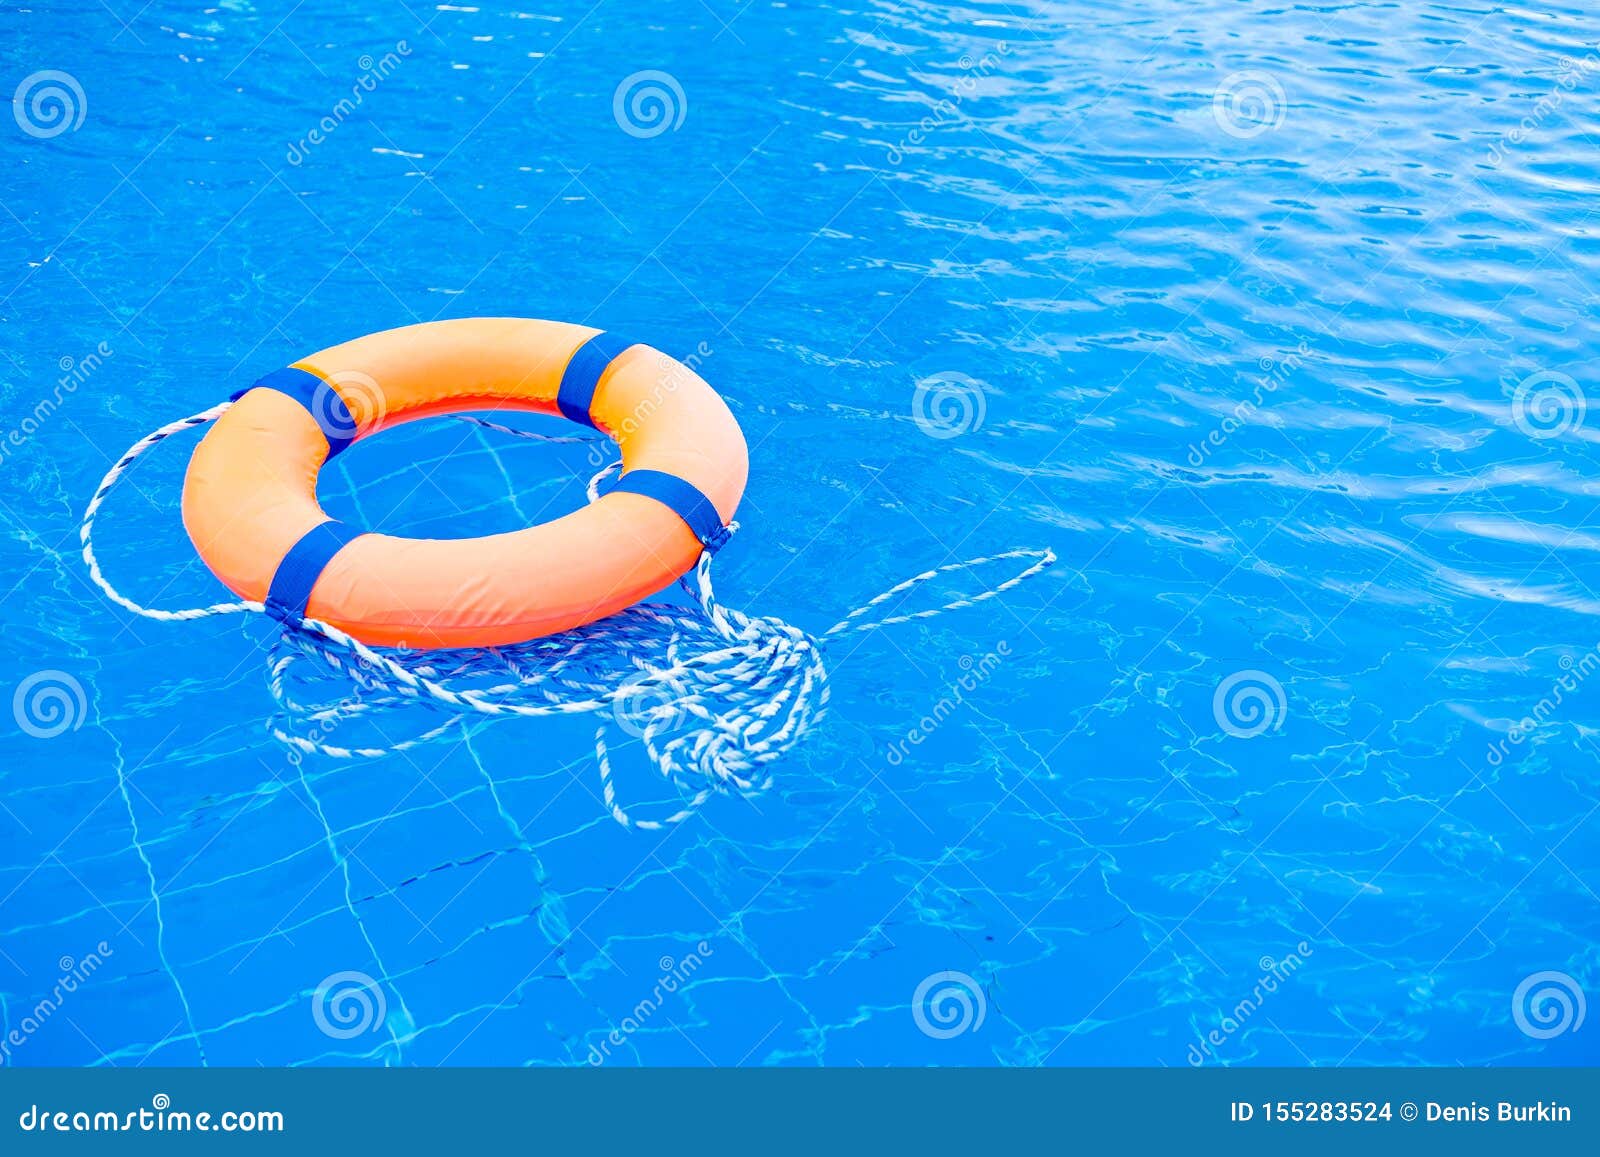 Premium Photo | Inflatable swim ring floating in pool splashes and drops on  the water summer time premium photo